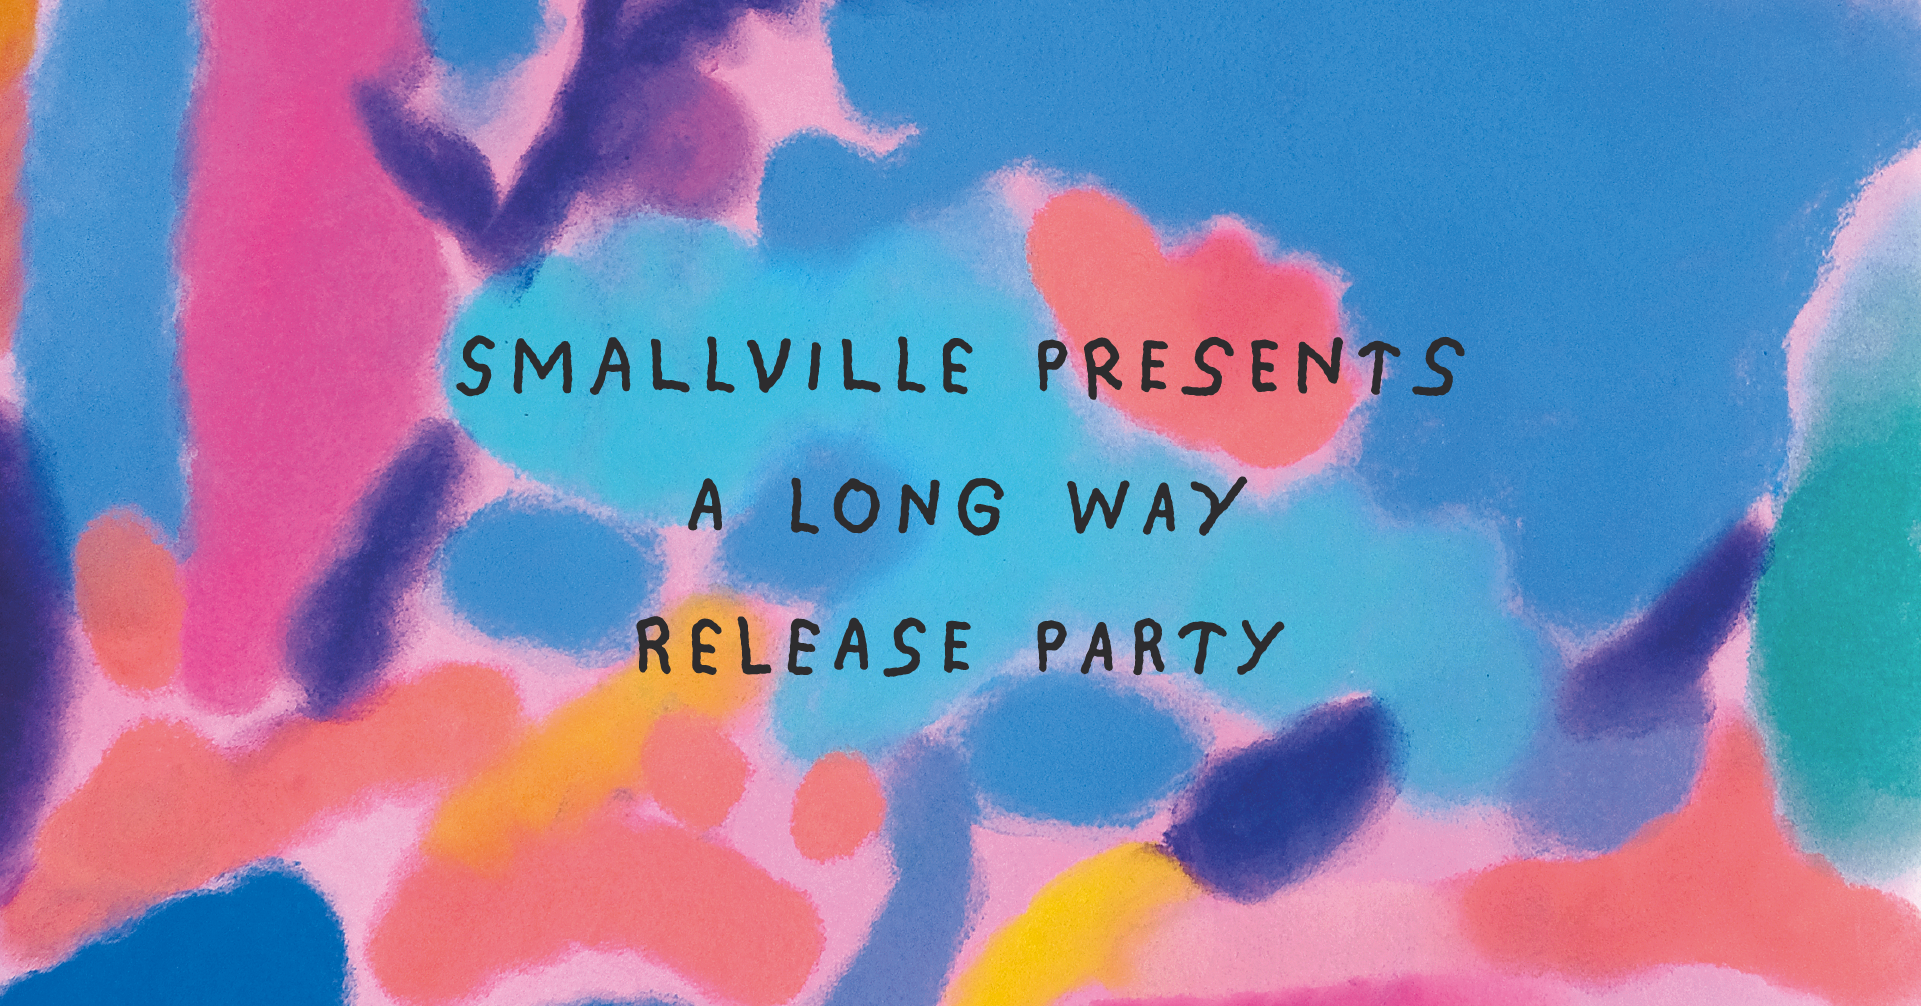 Smallville presents 'A Long Way' release party - フライヤー表